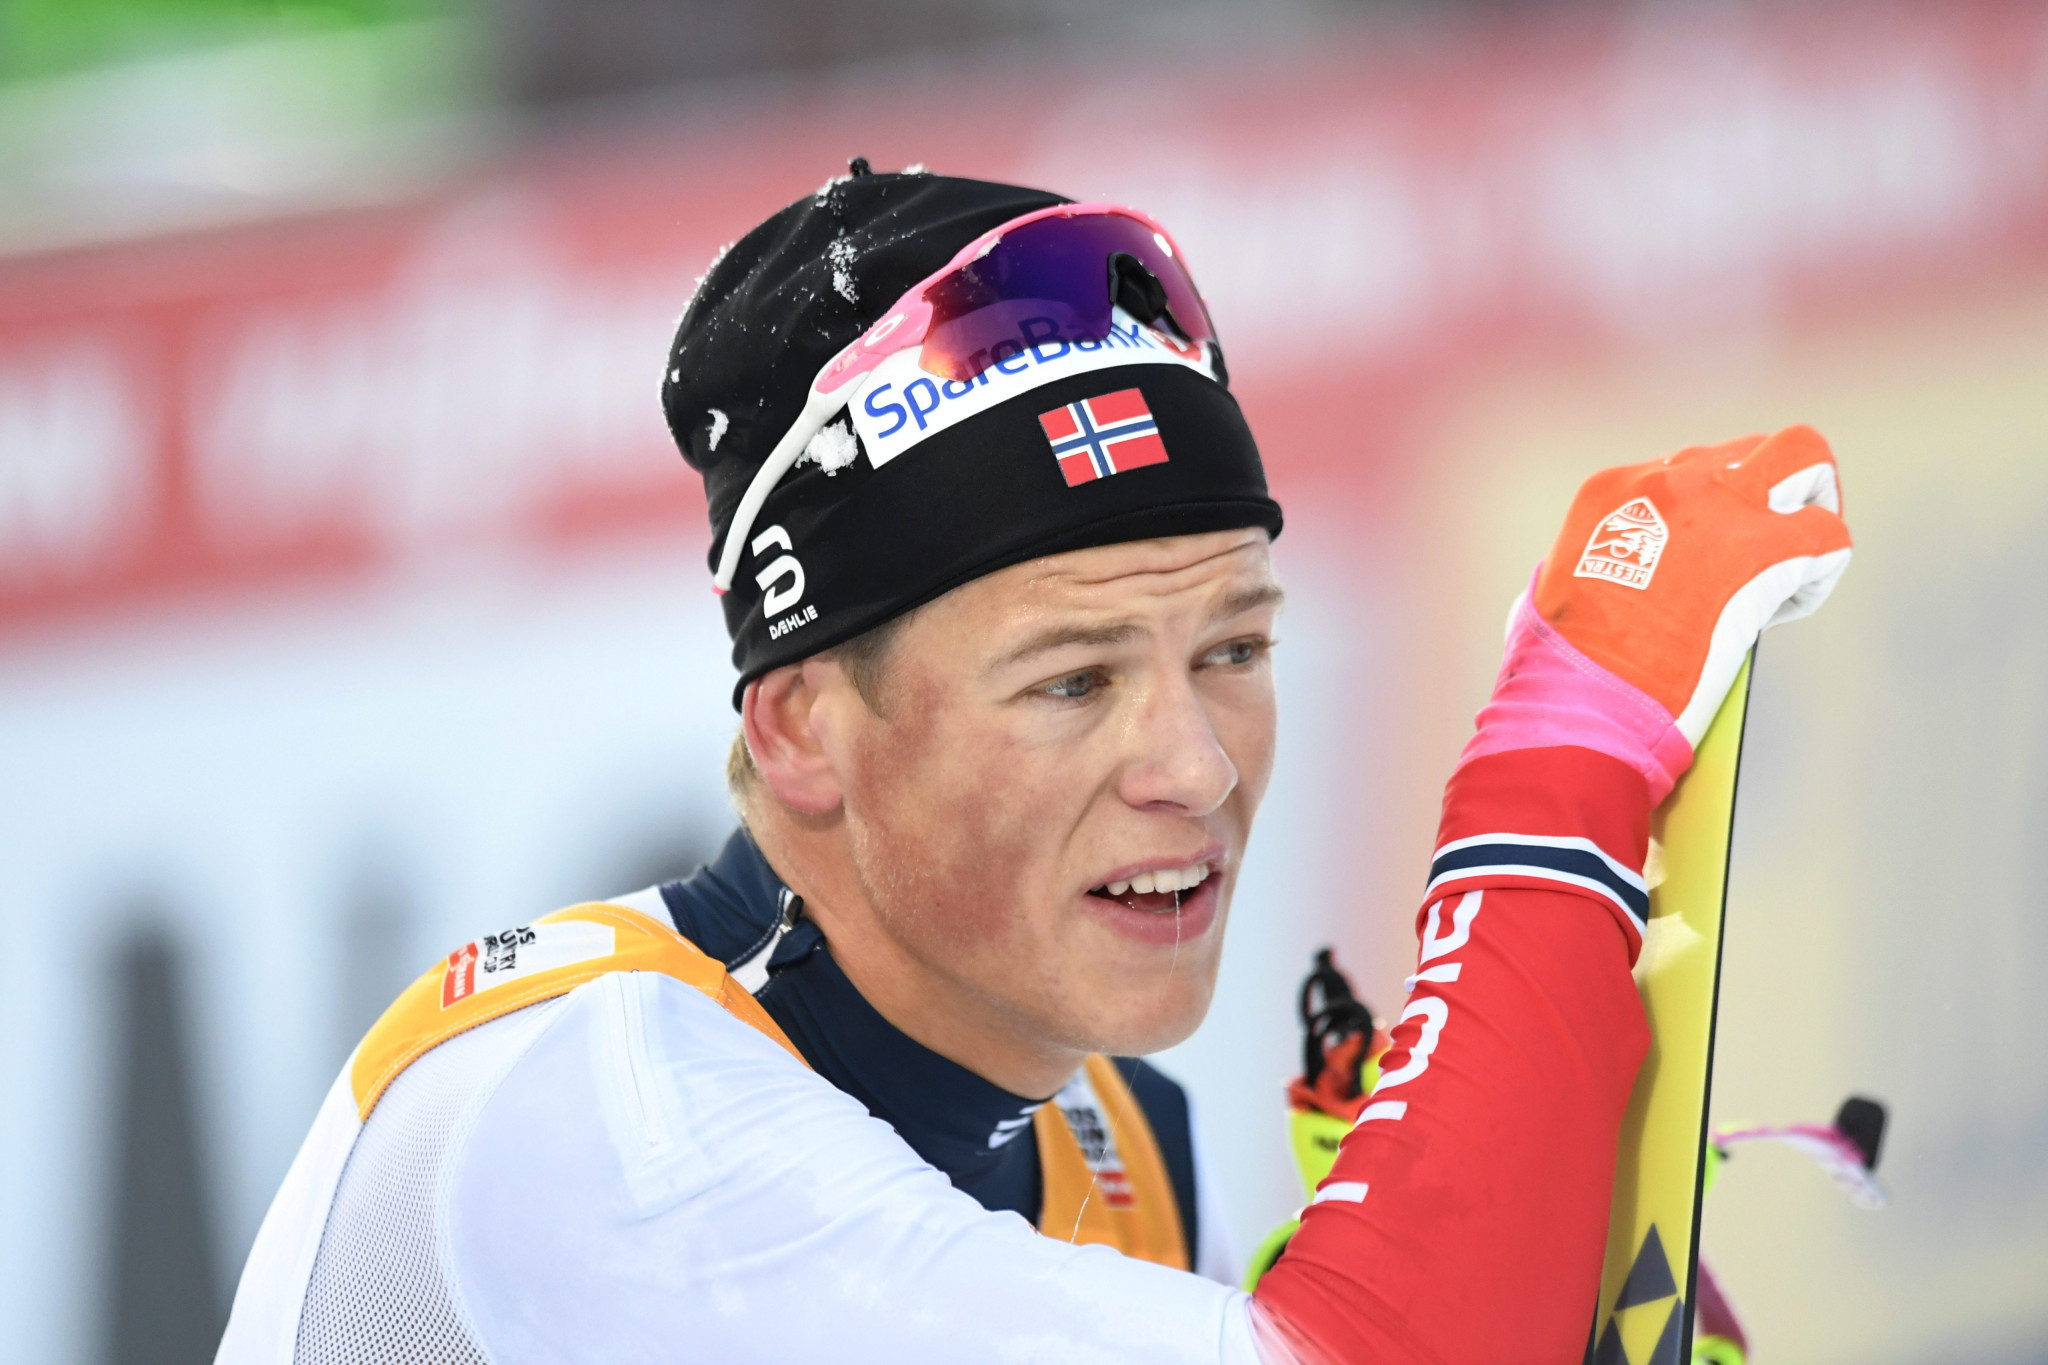 Norway’s Johannes Hoesflot Klaebo was in imperious form in the International Ski Federation Cross Country World Cup in Ruka, Finland ©Getty Images